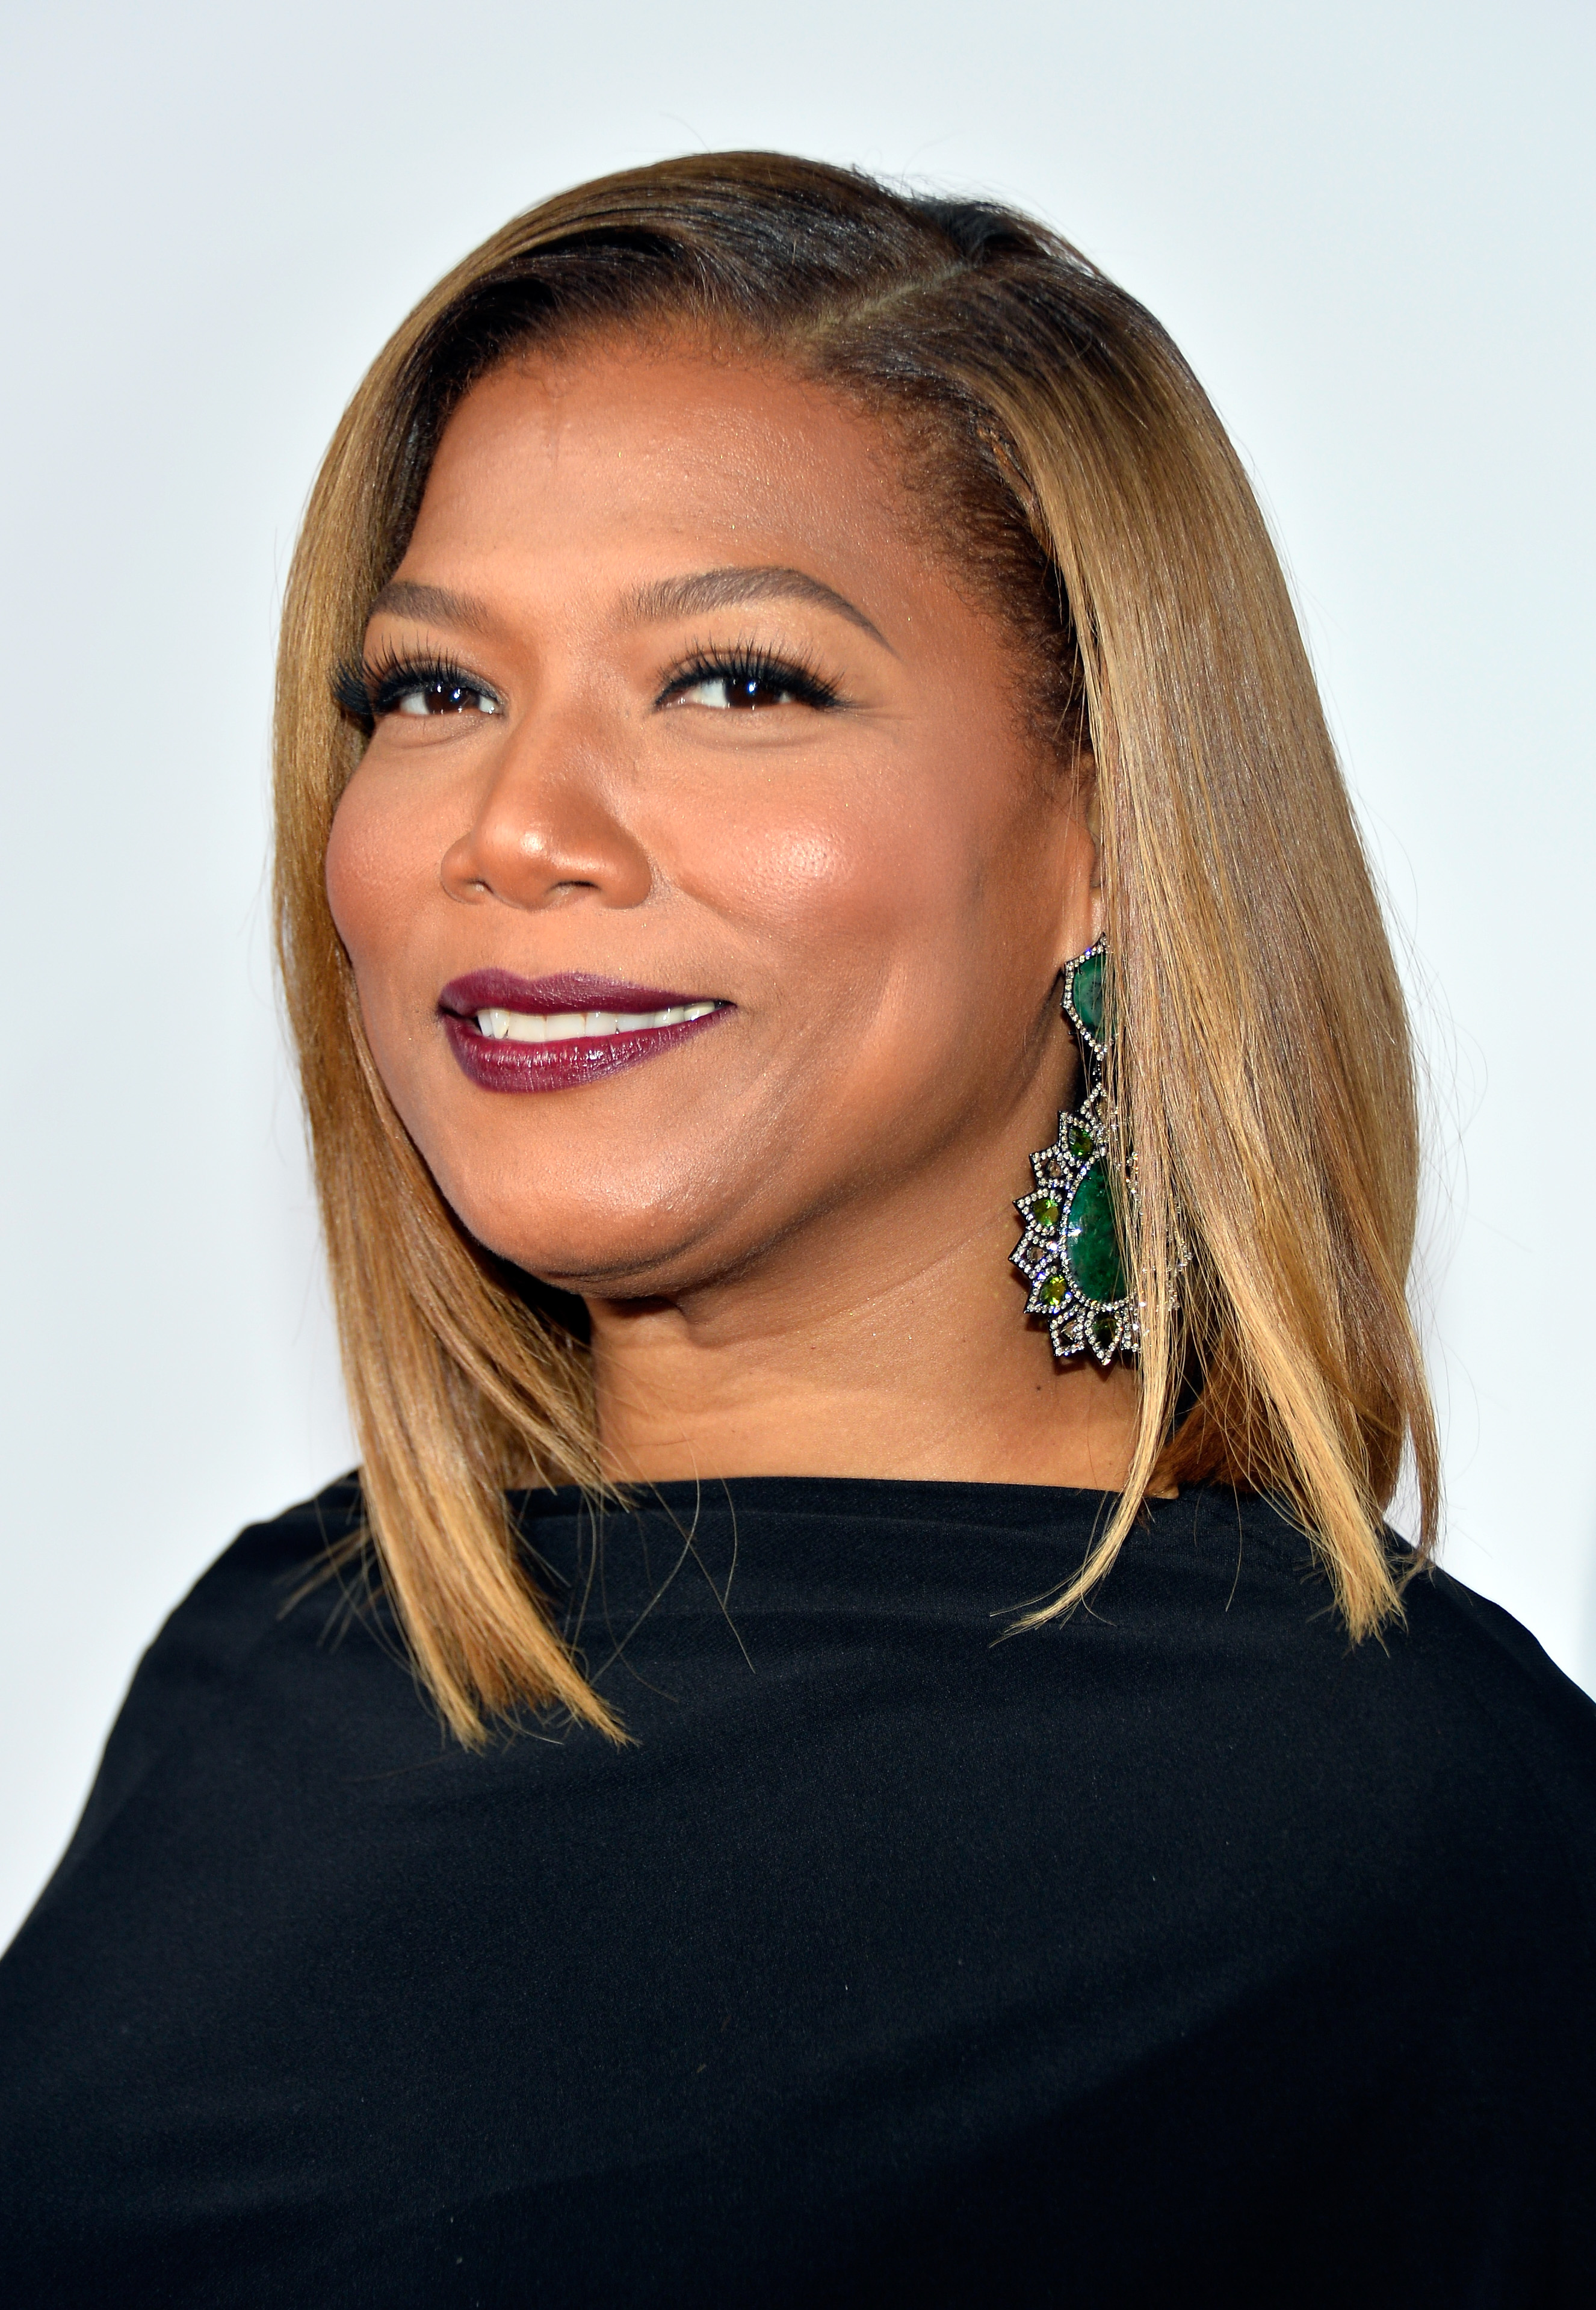 Queen Latifah Joins Sony’s FaithBased Drama “Miracles From Heaven